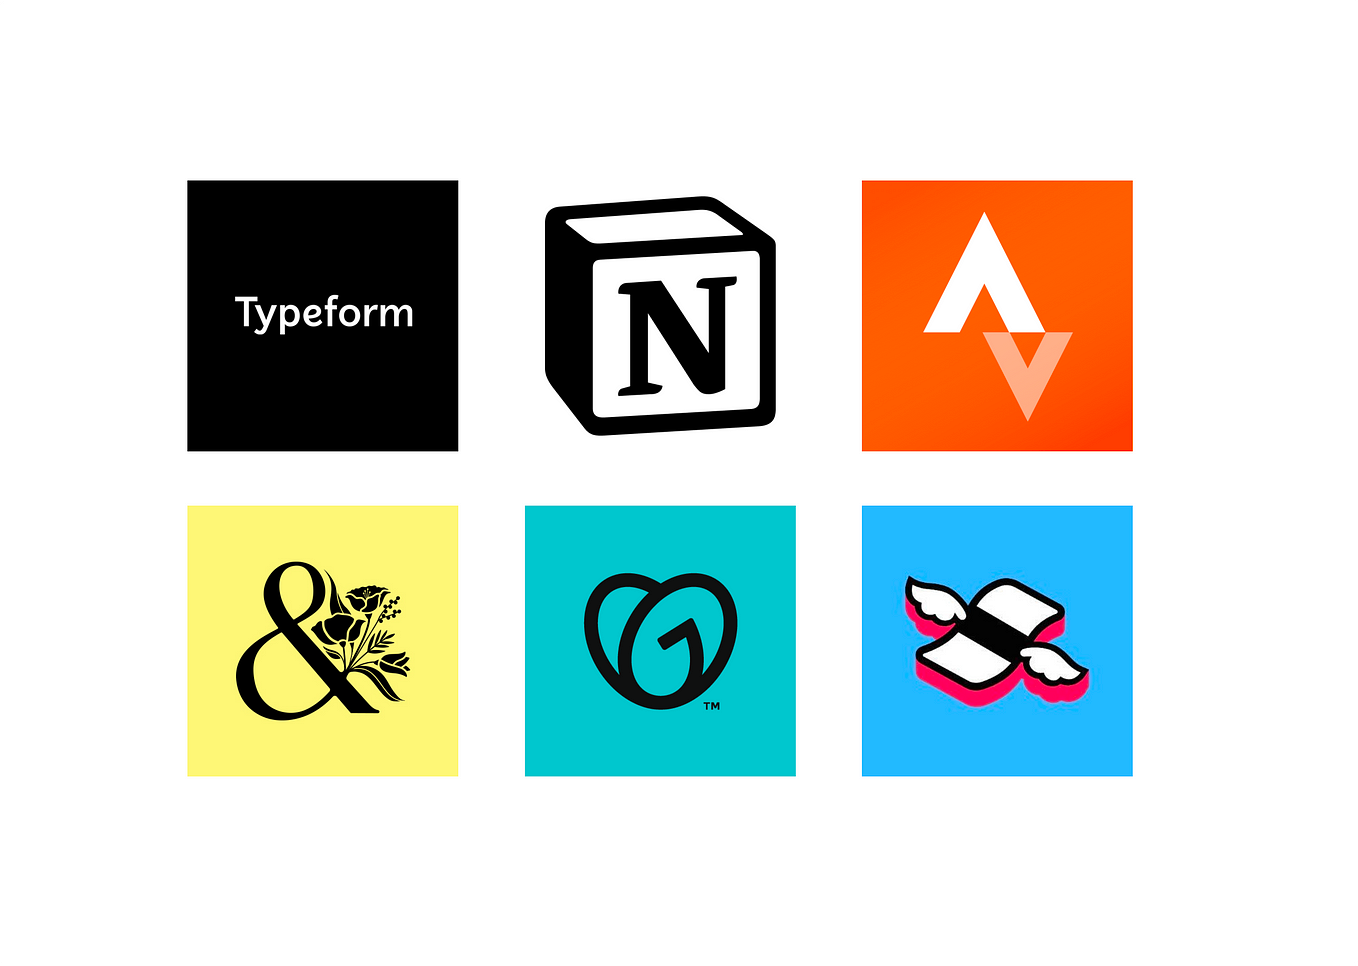 Image of 6 products in the article: Typeform, Notion, Strava, Bloom & Wild, GoDaddy, Finimize